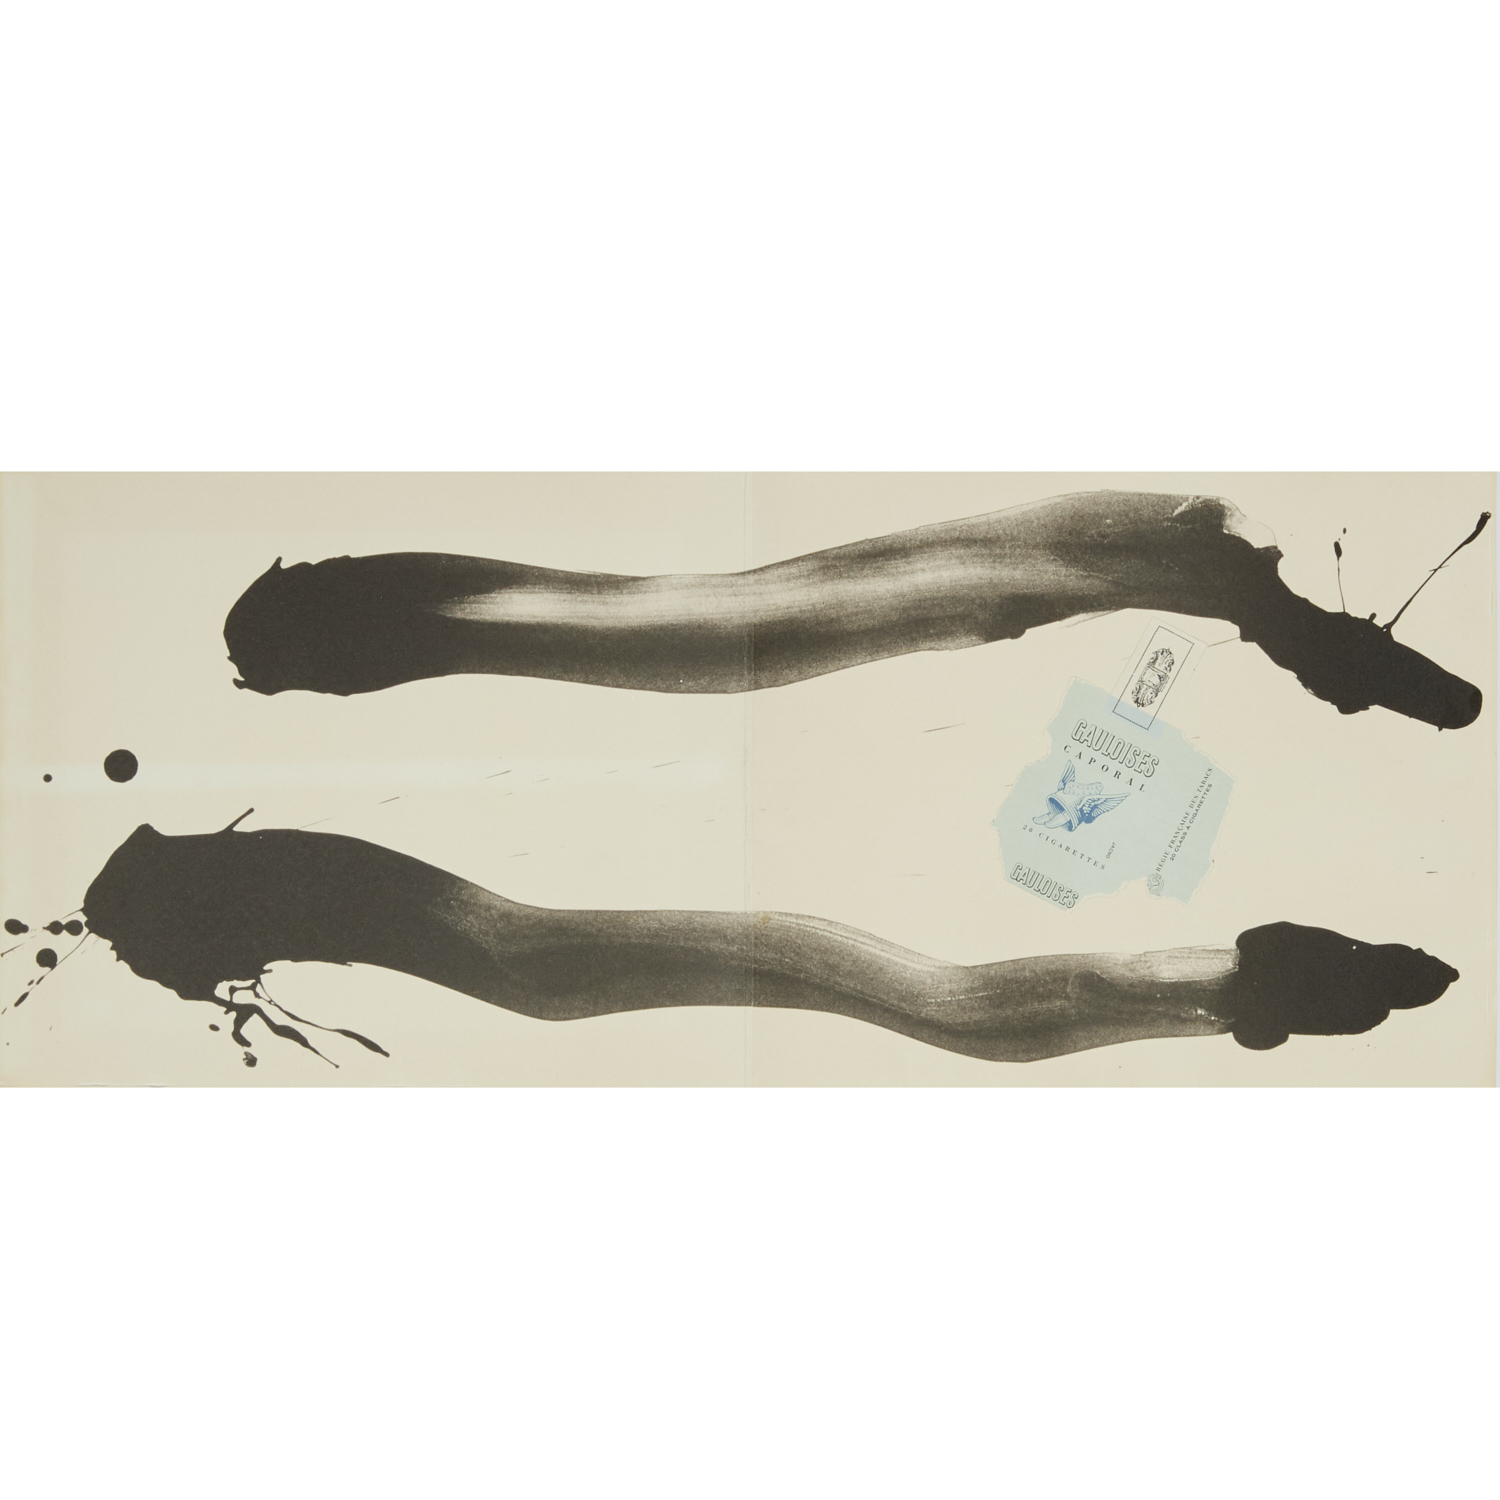 ROBERT MOTHERWELL LITHOGRAPH WITH 3601b1